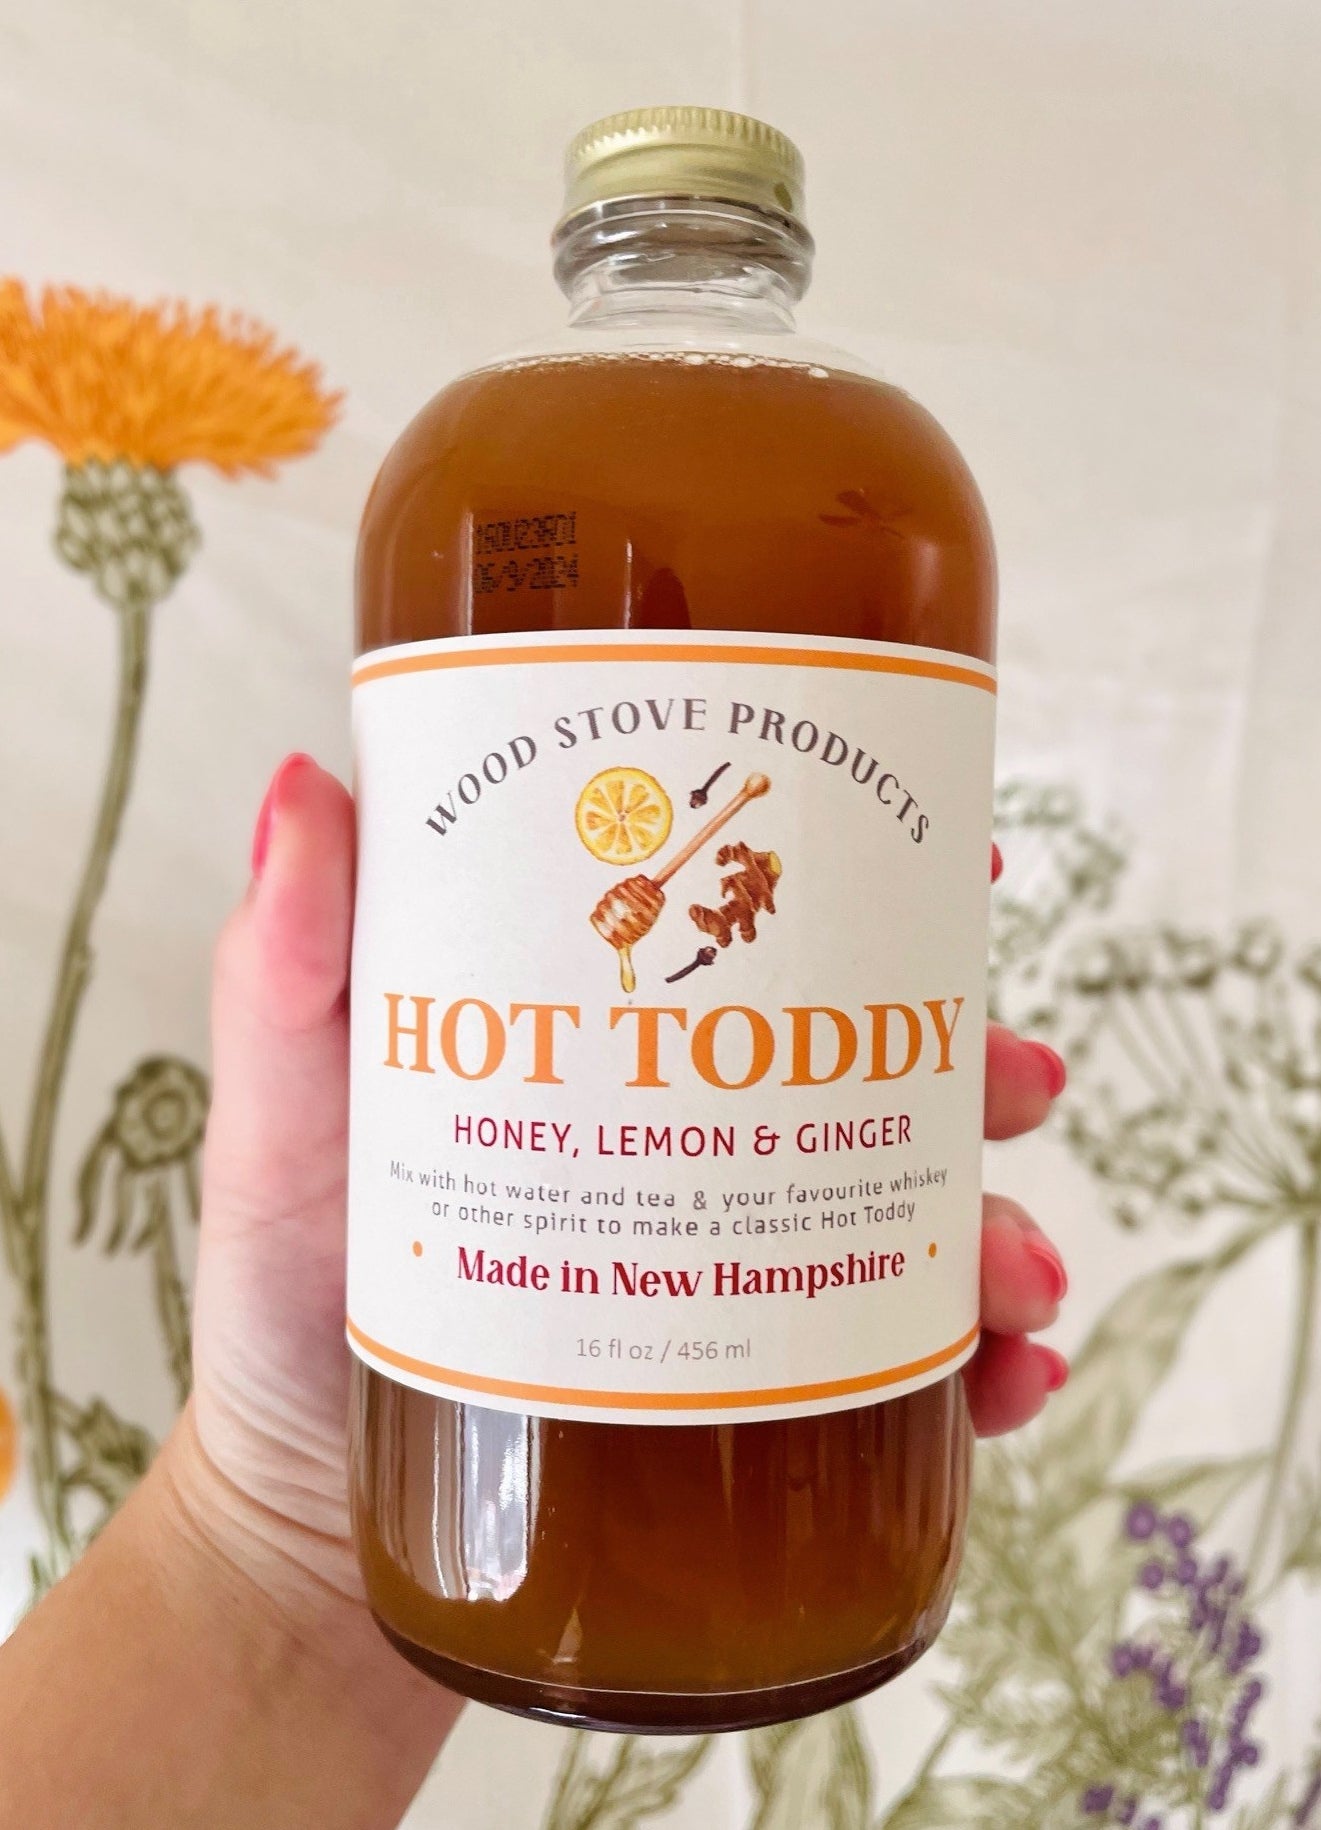 A bottle of the hot toddy with honey, lemon, and ginger